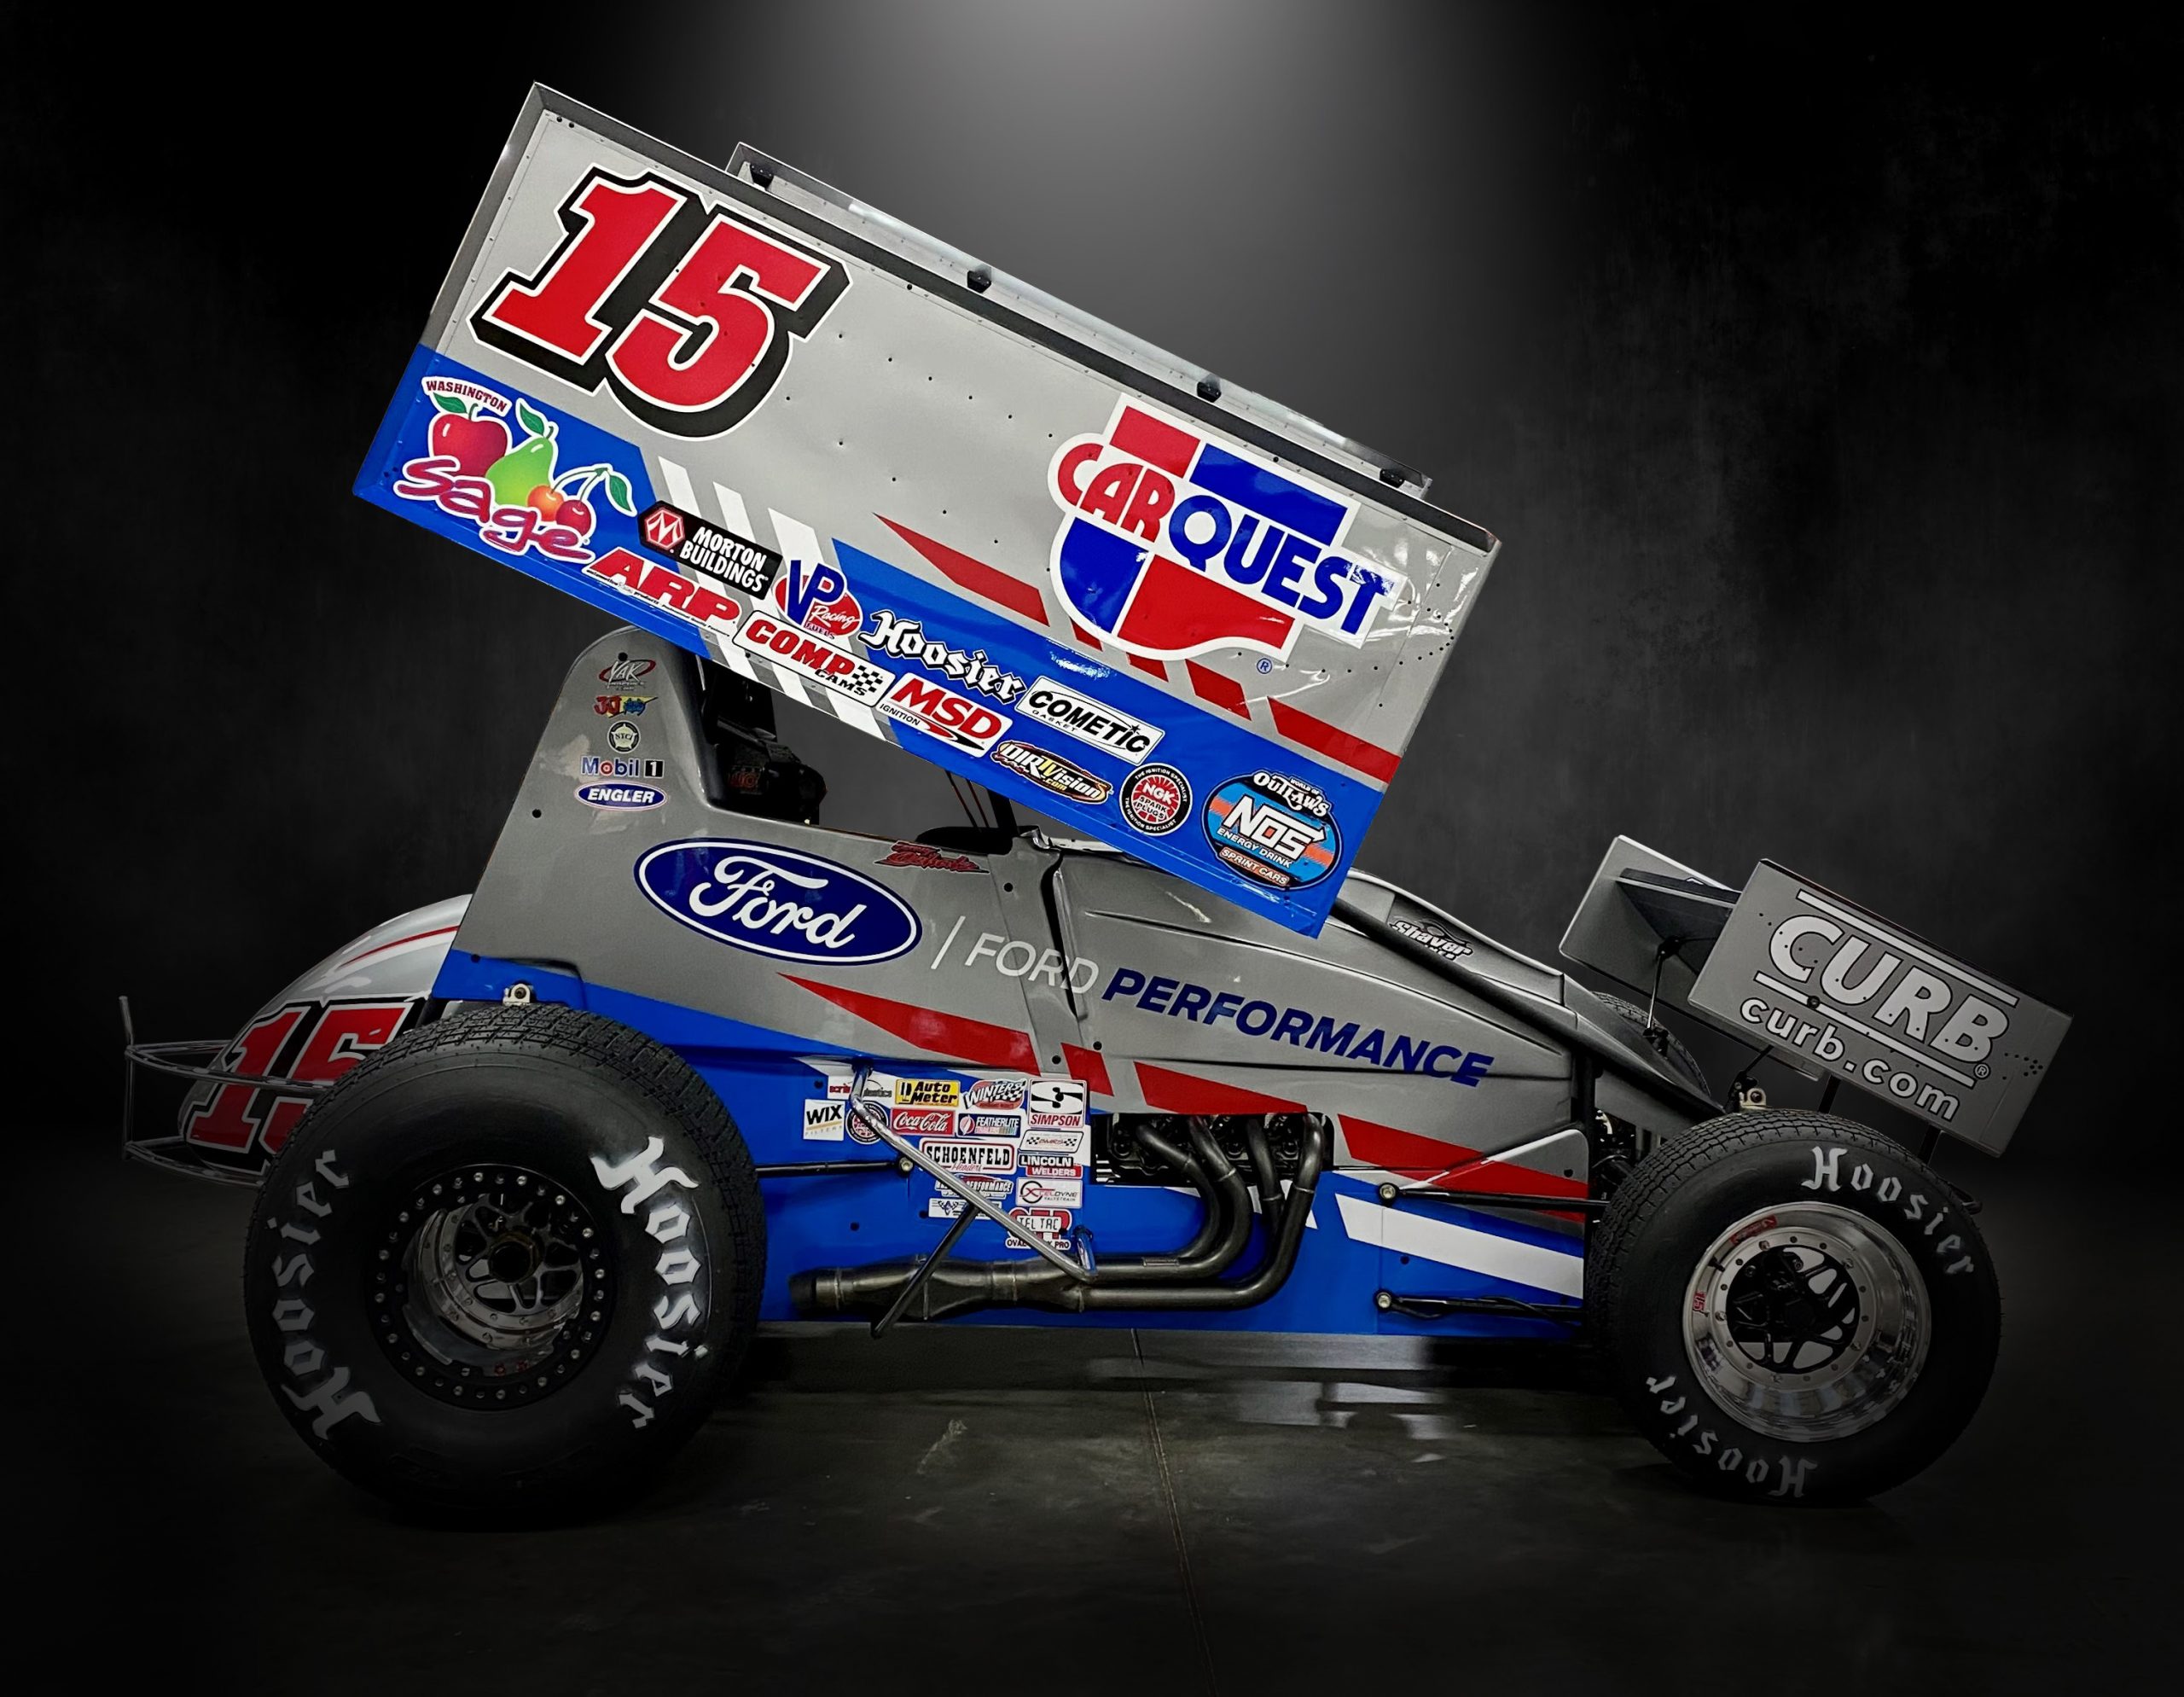 Donny Schatz motivated to get back on top of Sprint Car racing with the